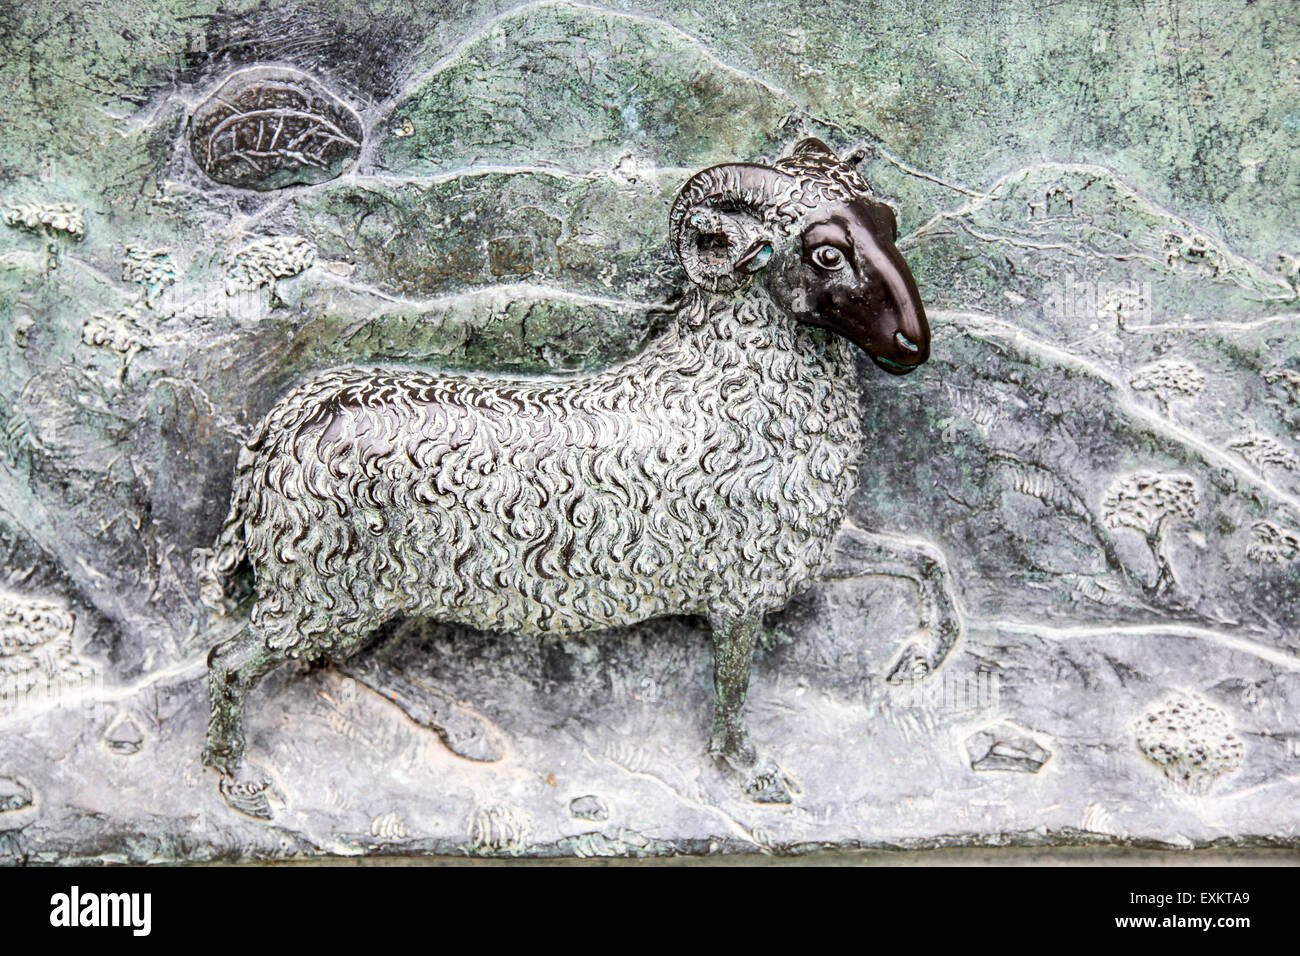 Roman period ram, carved relief on a sarcophagus panel inside the Camposanto Monumentale cemetery. Pisa, Tuscany, Italy. Stock Photo